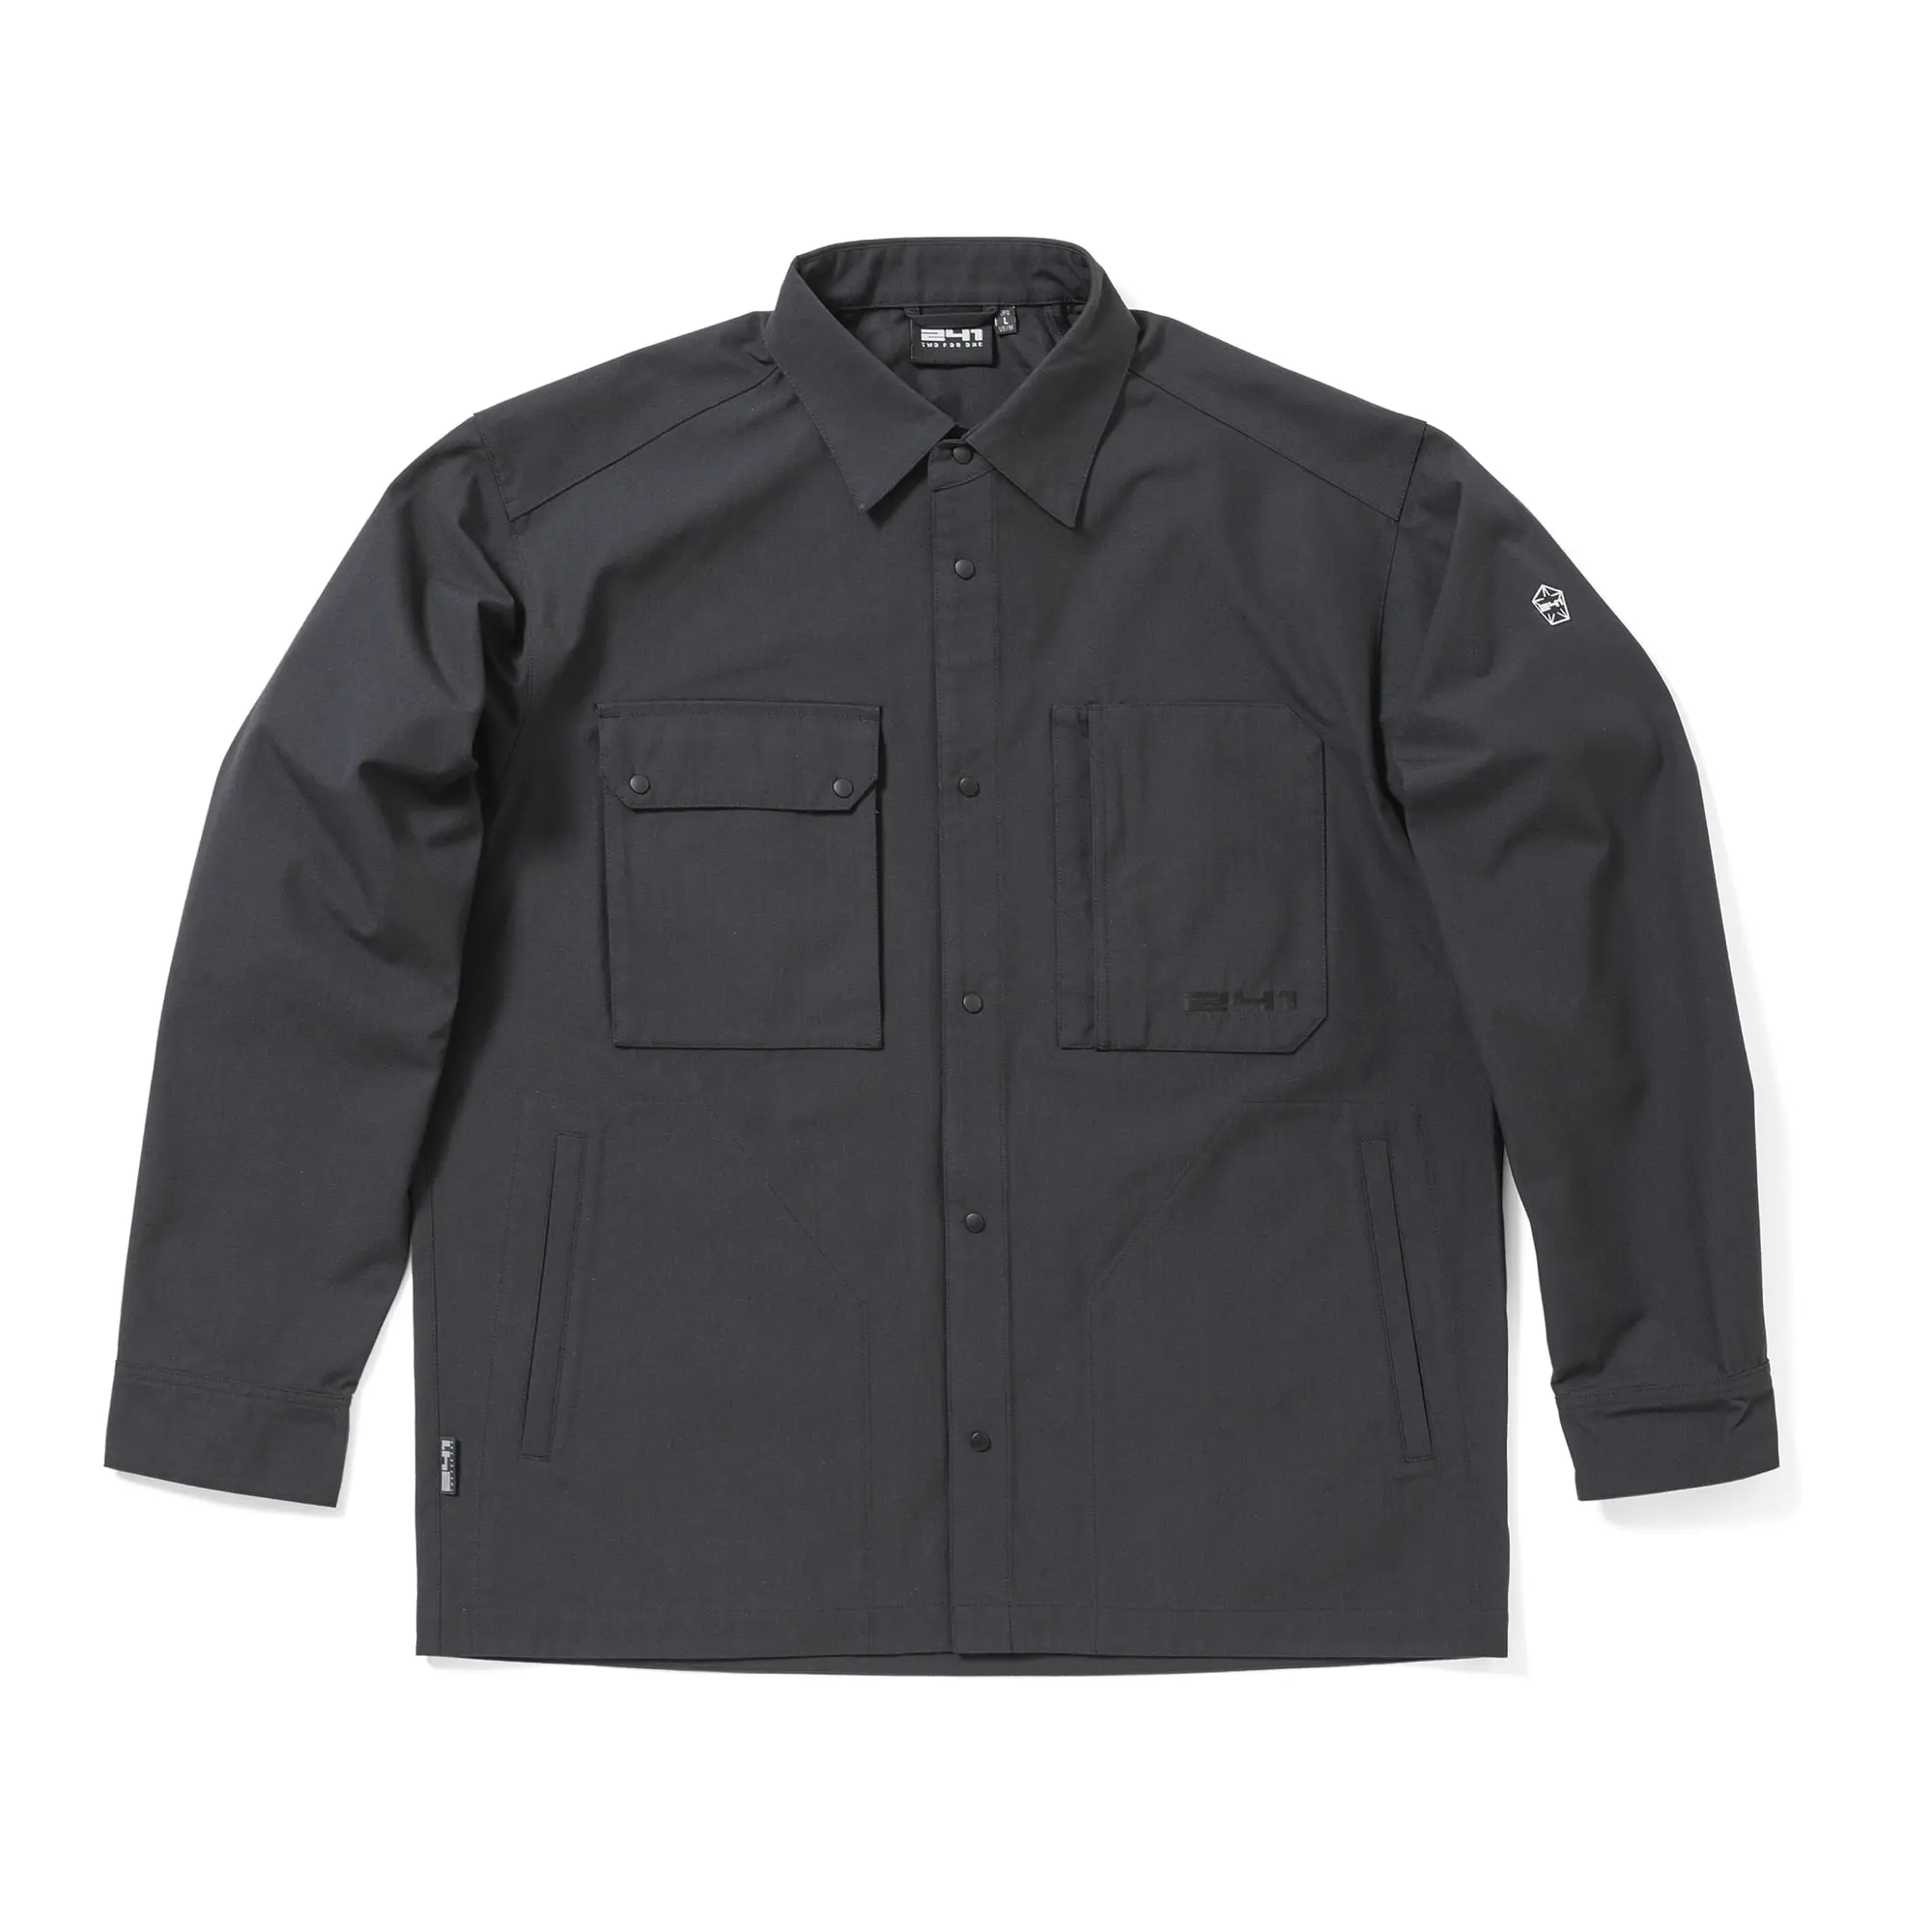 AREA241-WORK SHIRTS JACKET
COLOR: BLACK
¥24,200（tax incl.） MB1350